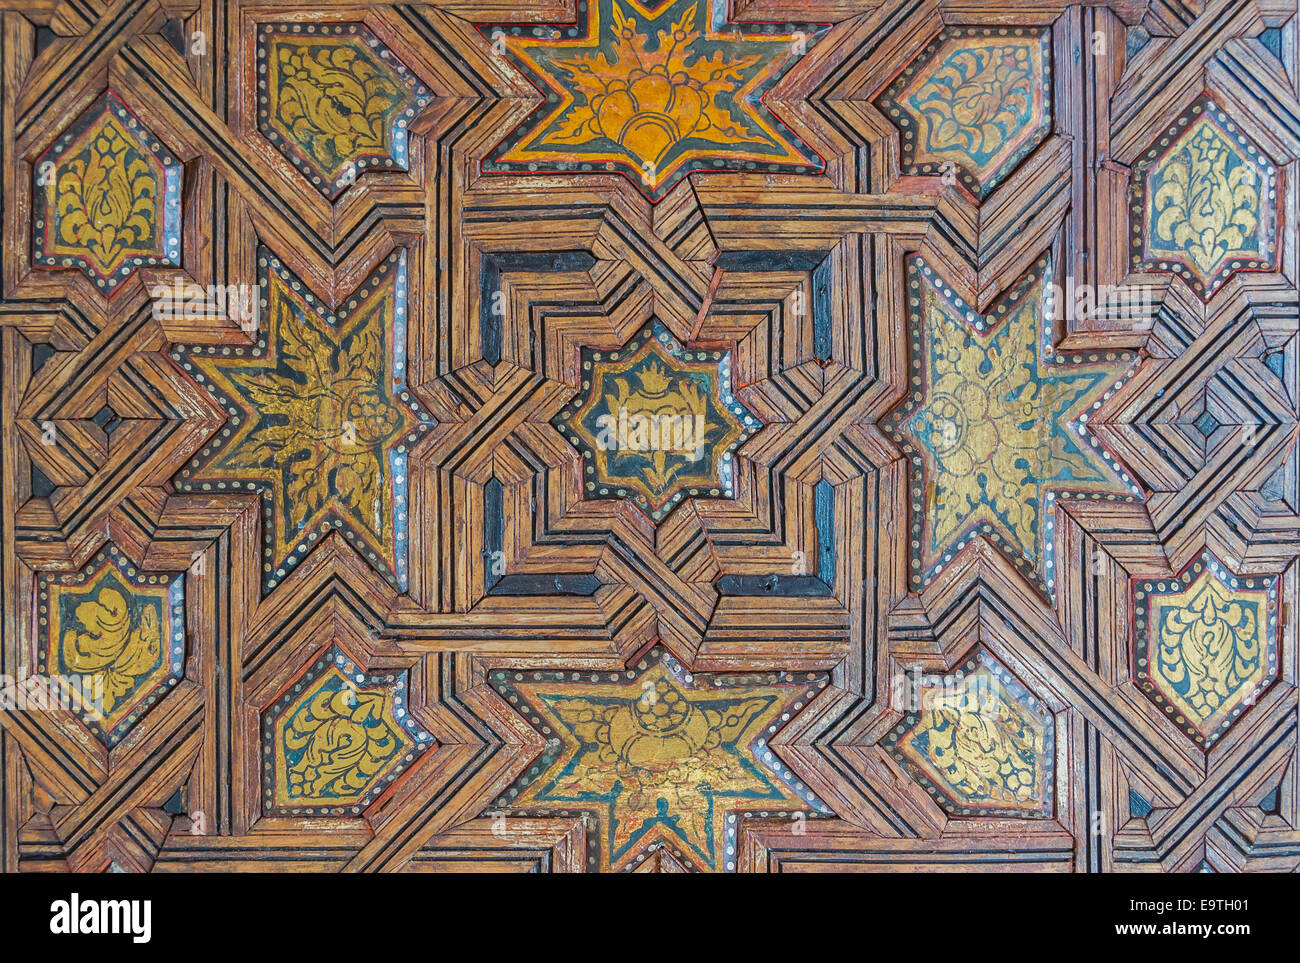 Details of the wooden ceiling in the Cuarto dorado, Alhambra, Granada, Andalusia, Spain Stock Photo